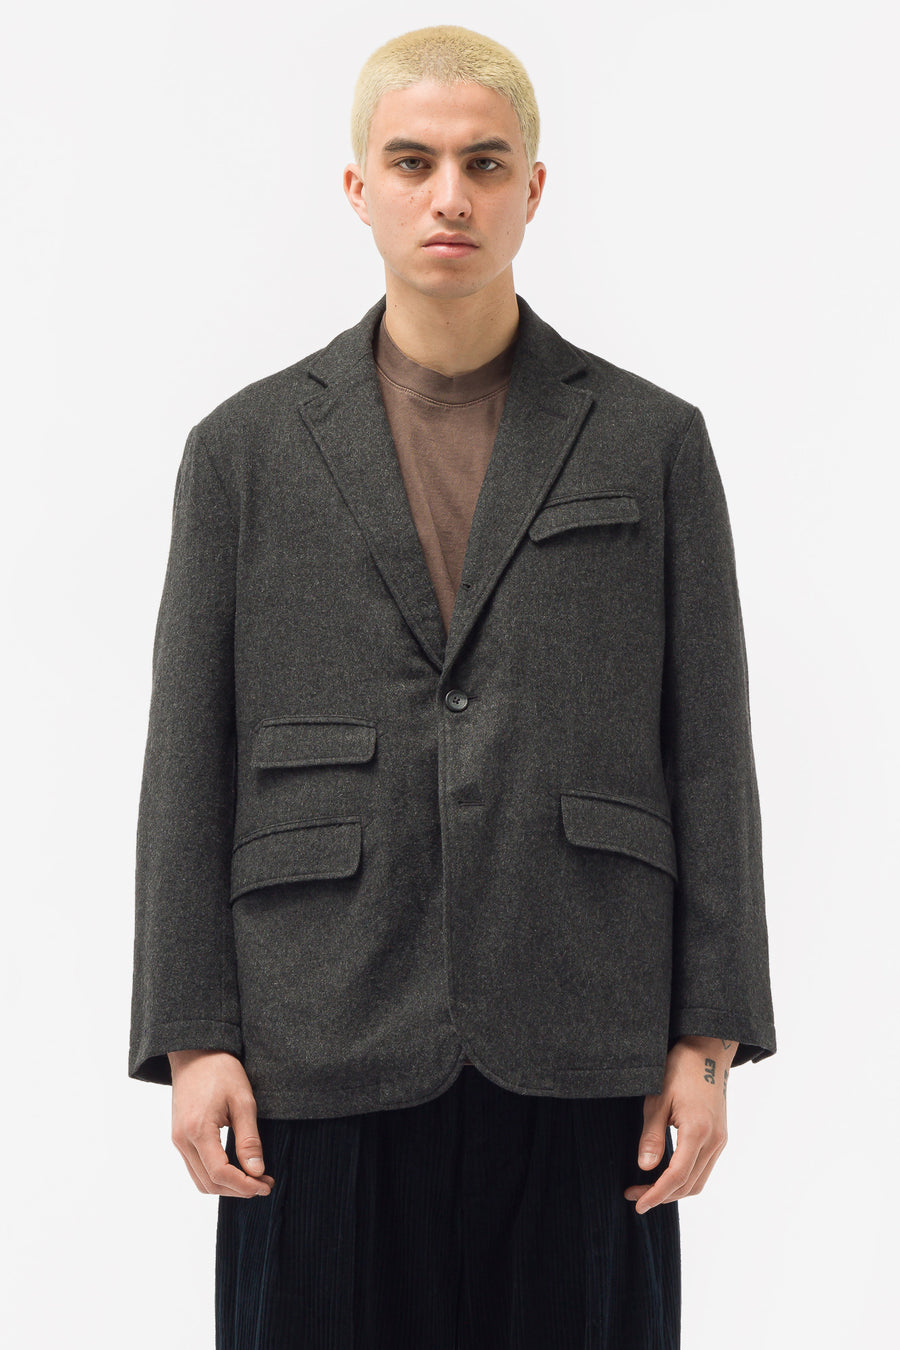 Engineered Garments - Andover Jacket in Grey Solid Poly Wool